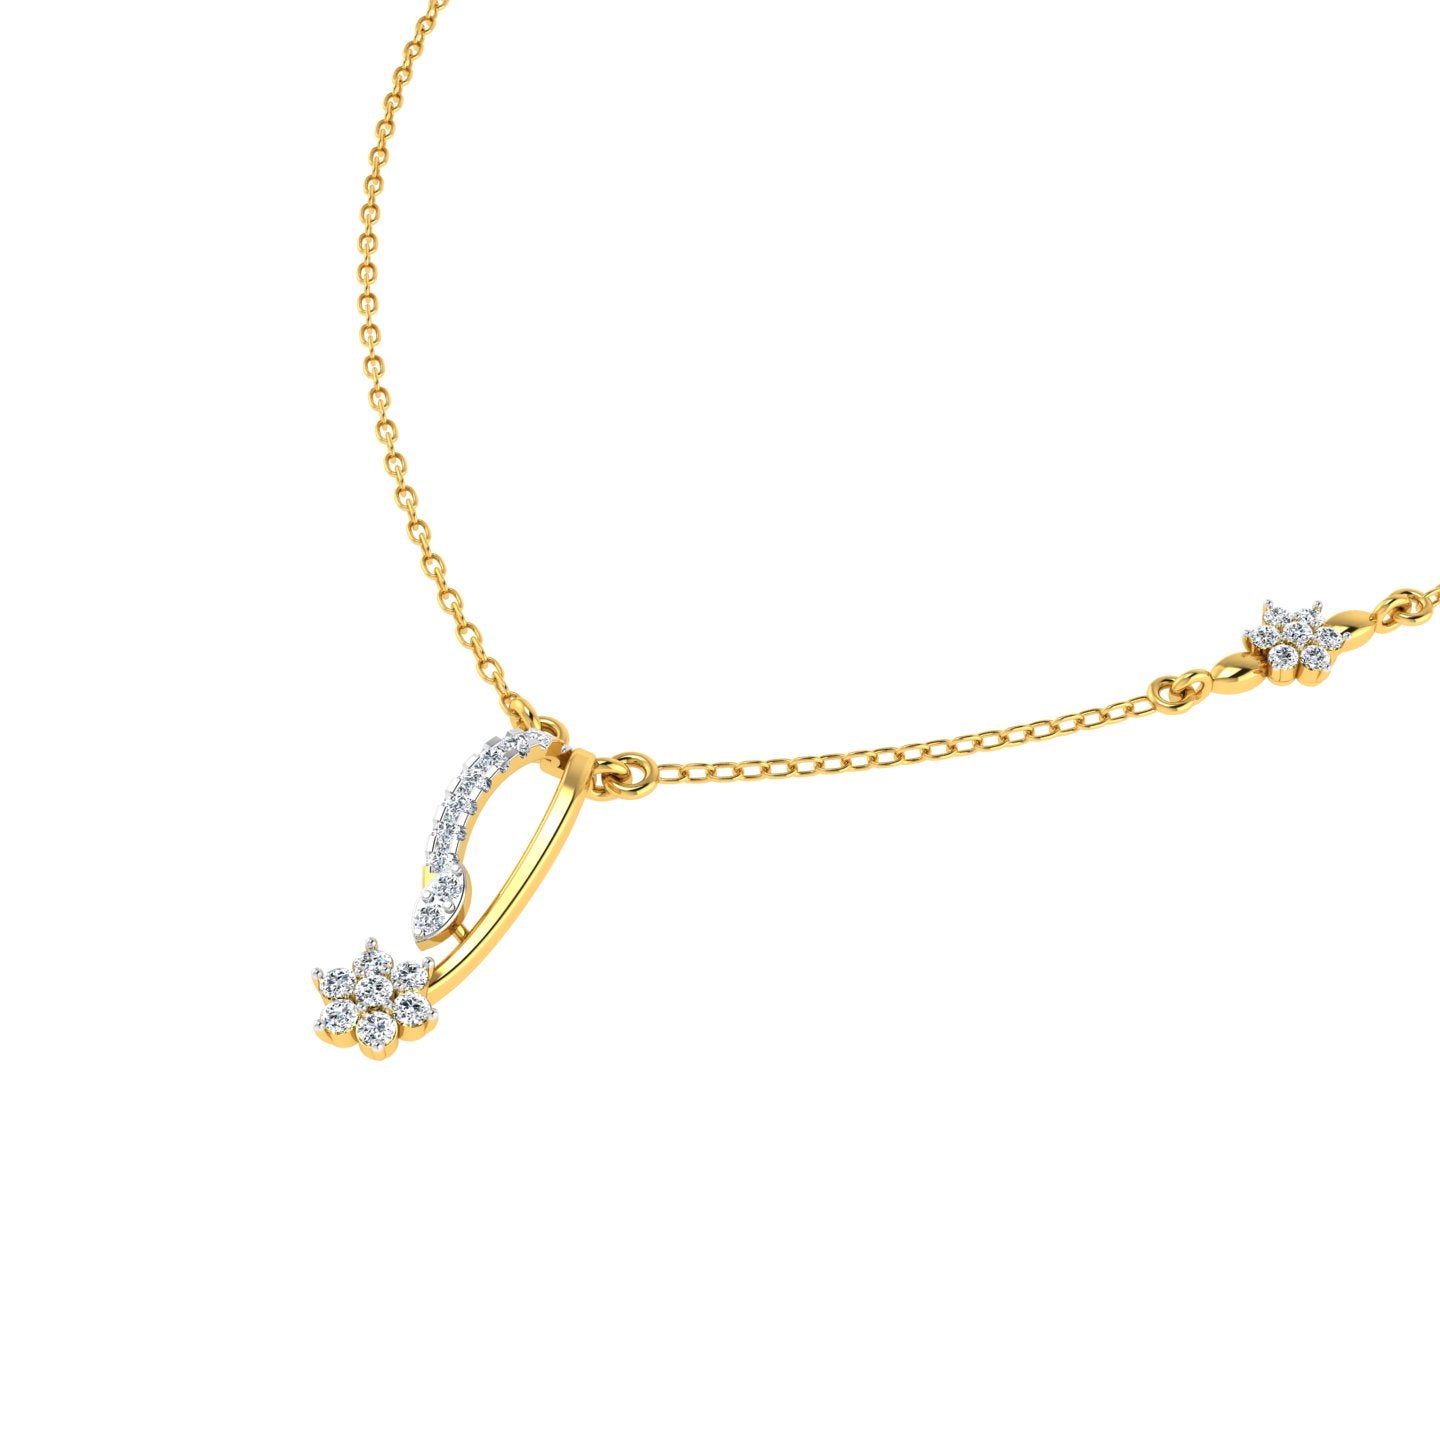 Compliments of Hanging Star Diamond Necklace